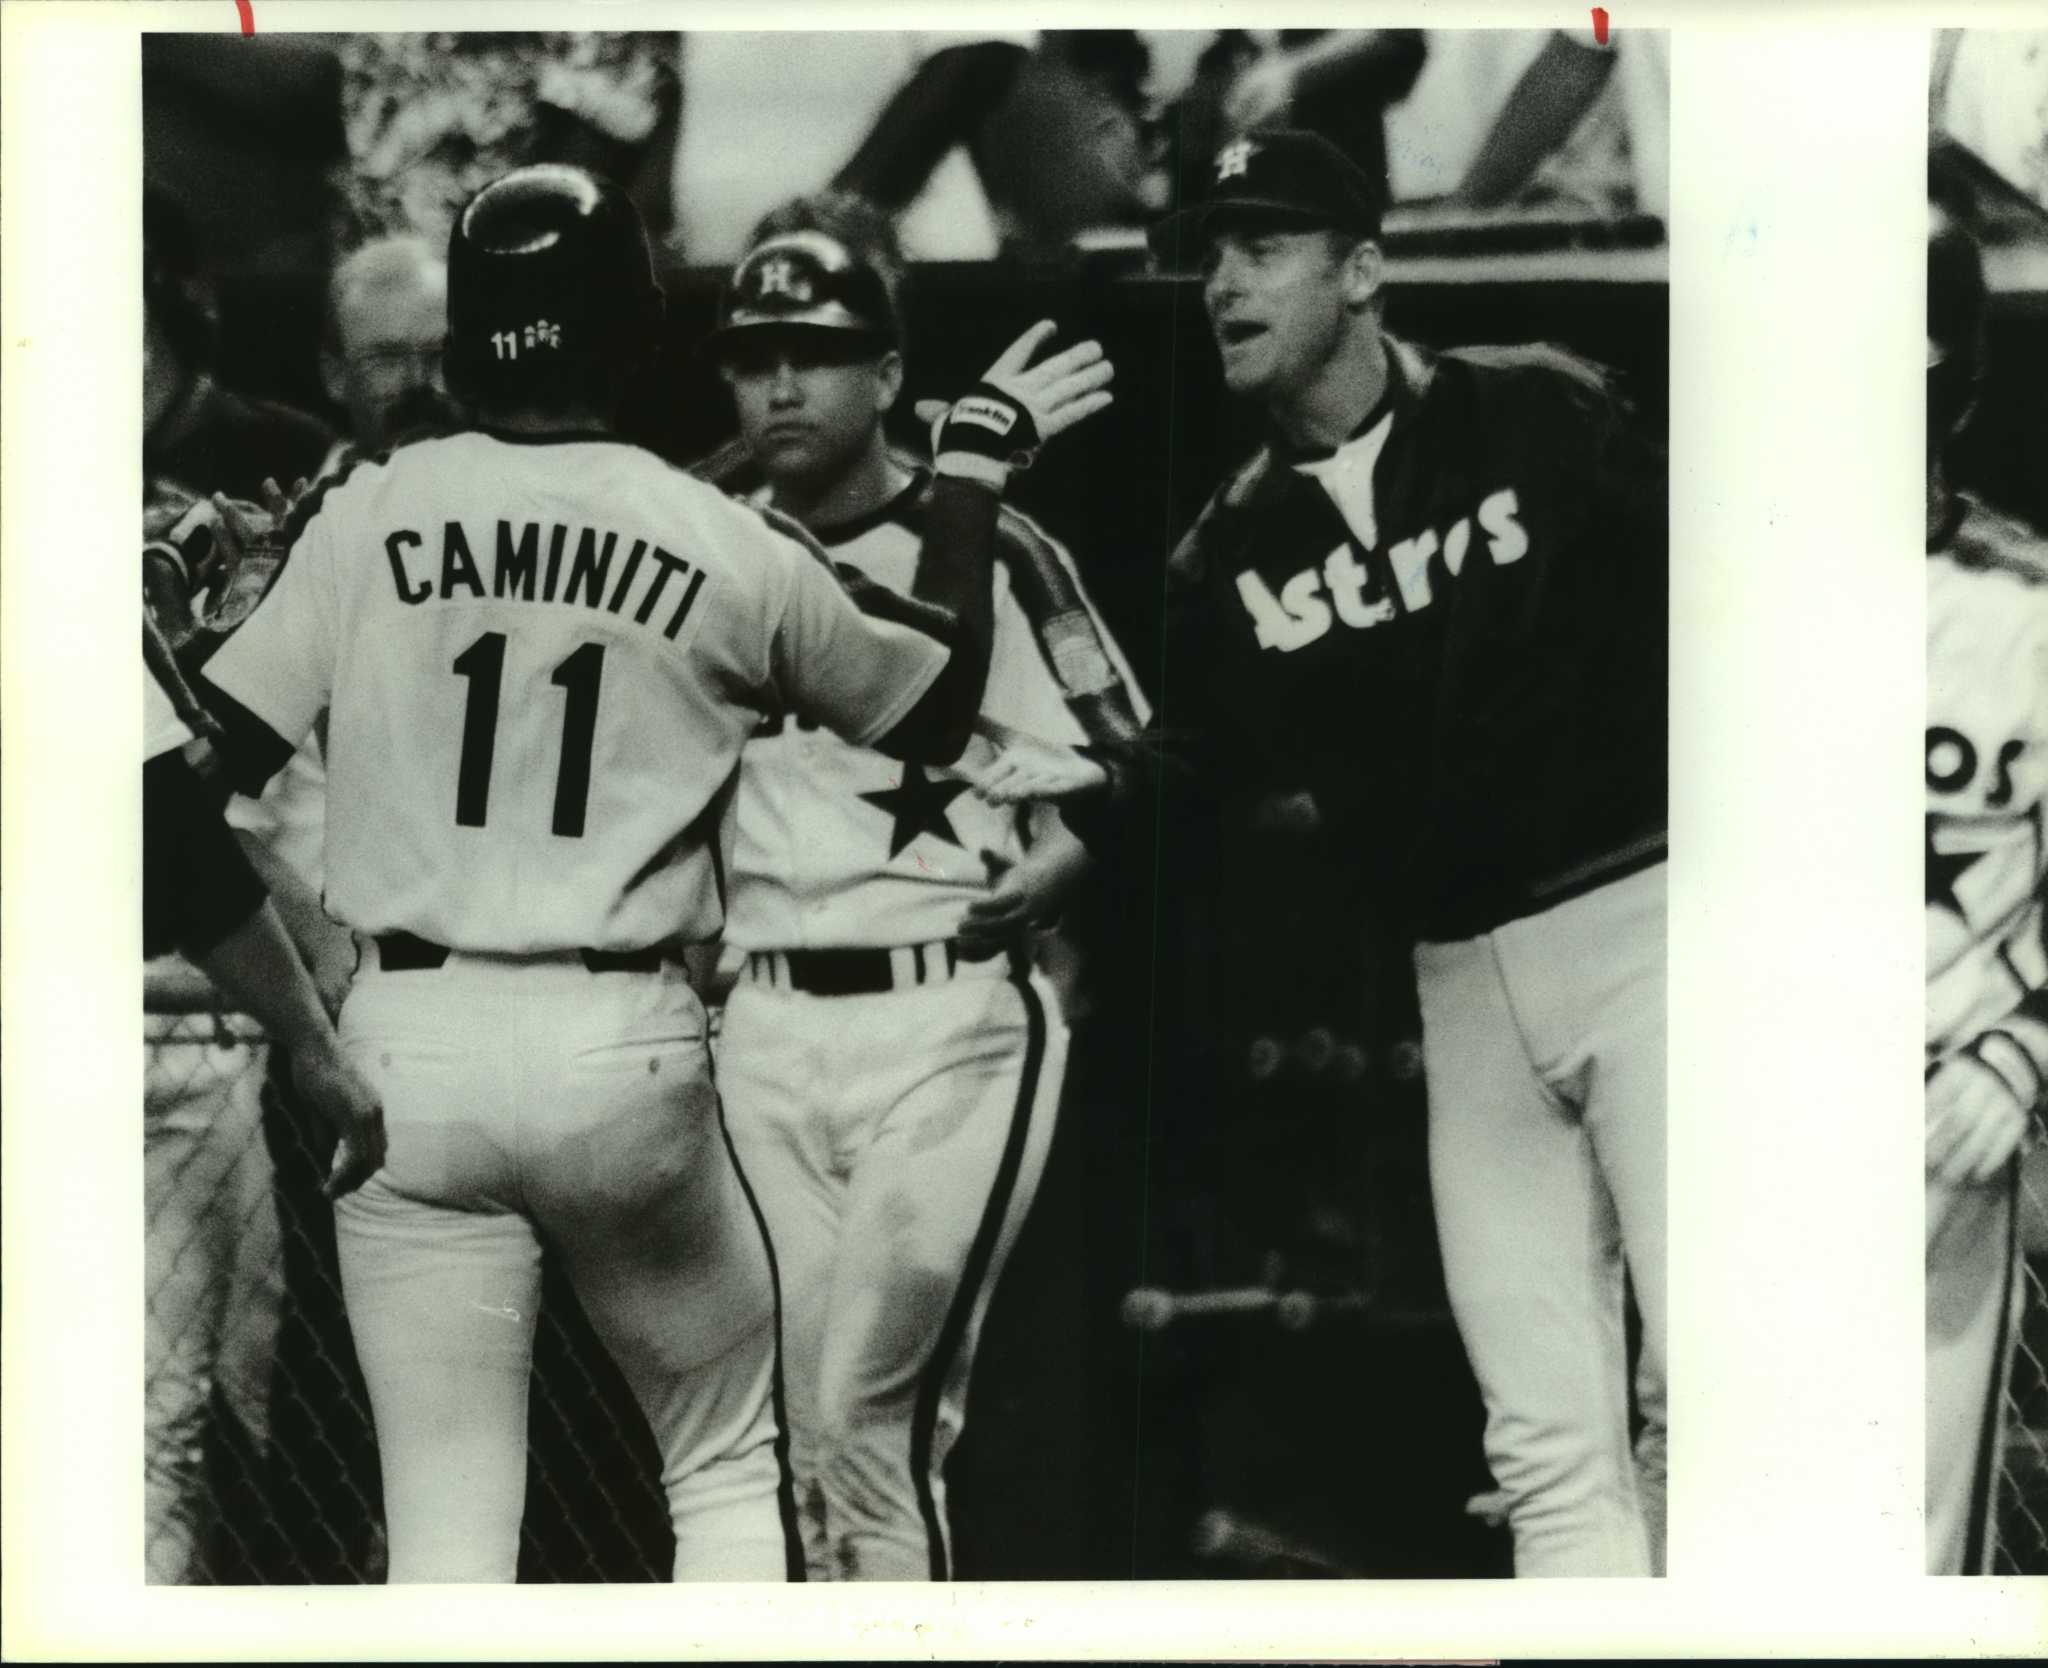 10 things we learned about former Astros star Ken Caminiti in new book  'Playing Through the Pain